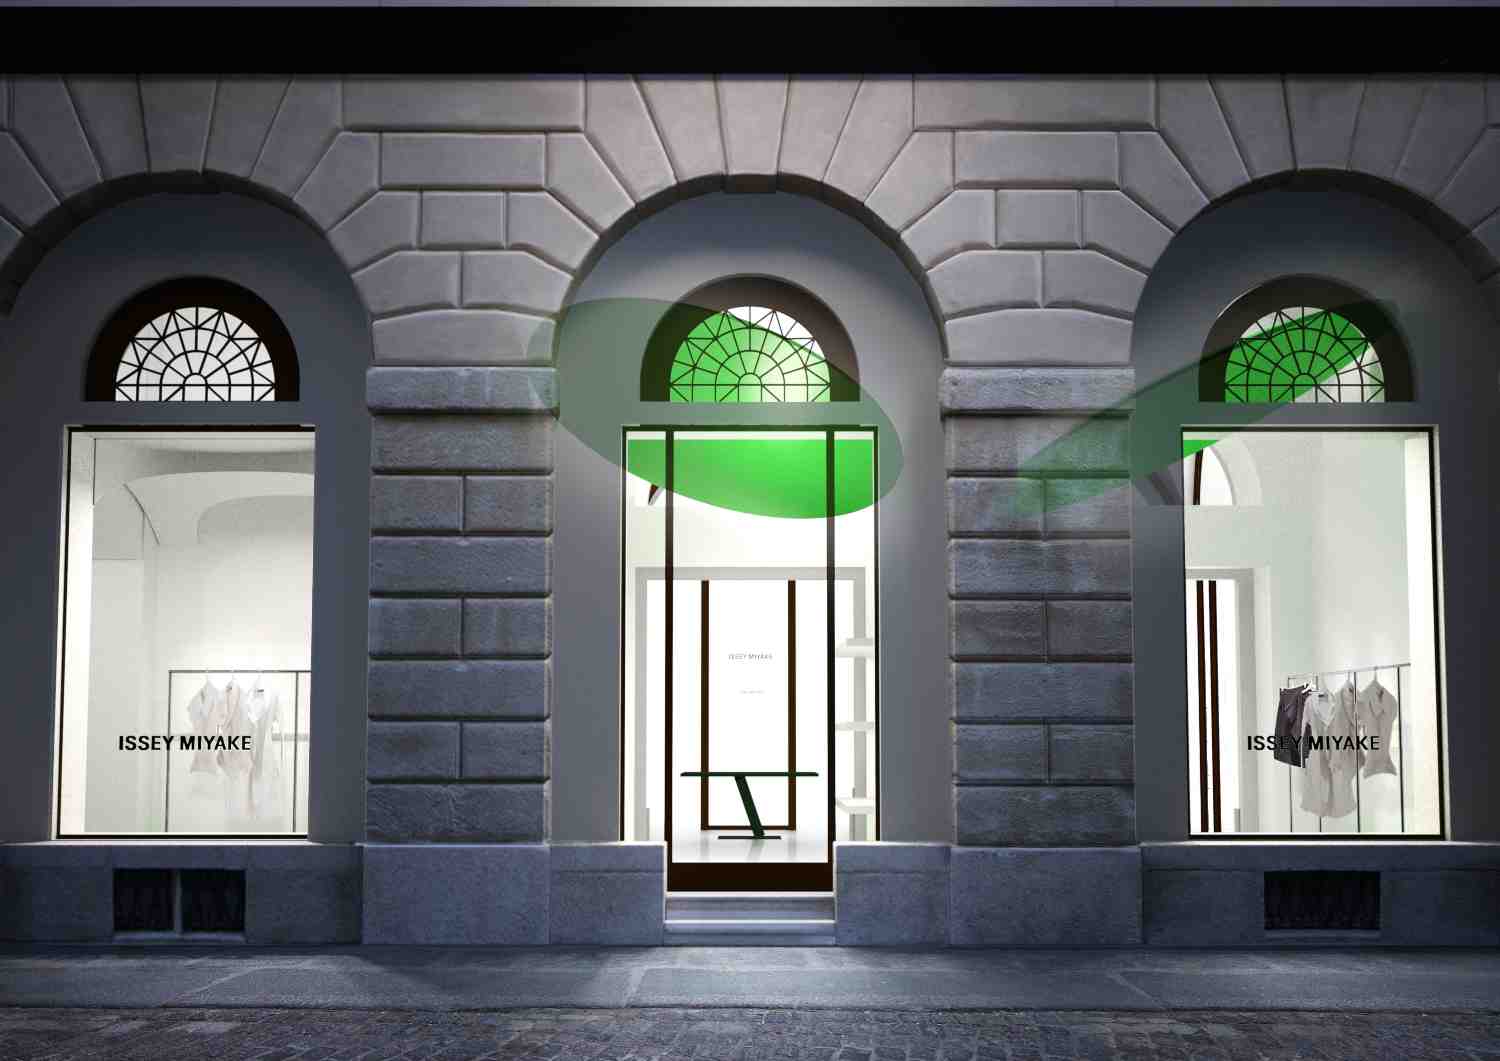 ISSEY MIYAKE OPENS ITS FIRST FLAGSHIP STORE IN MILAN